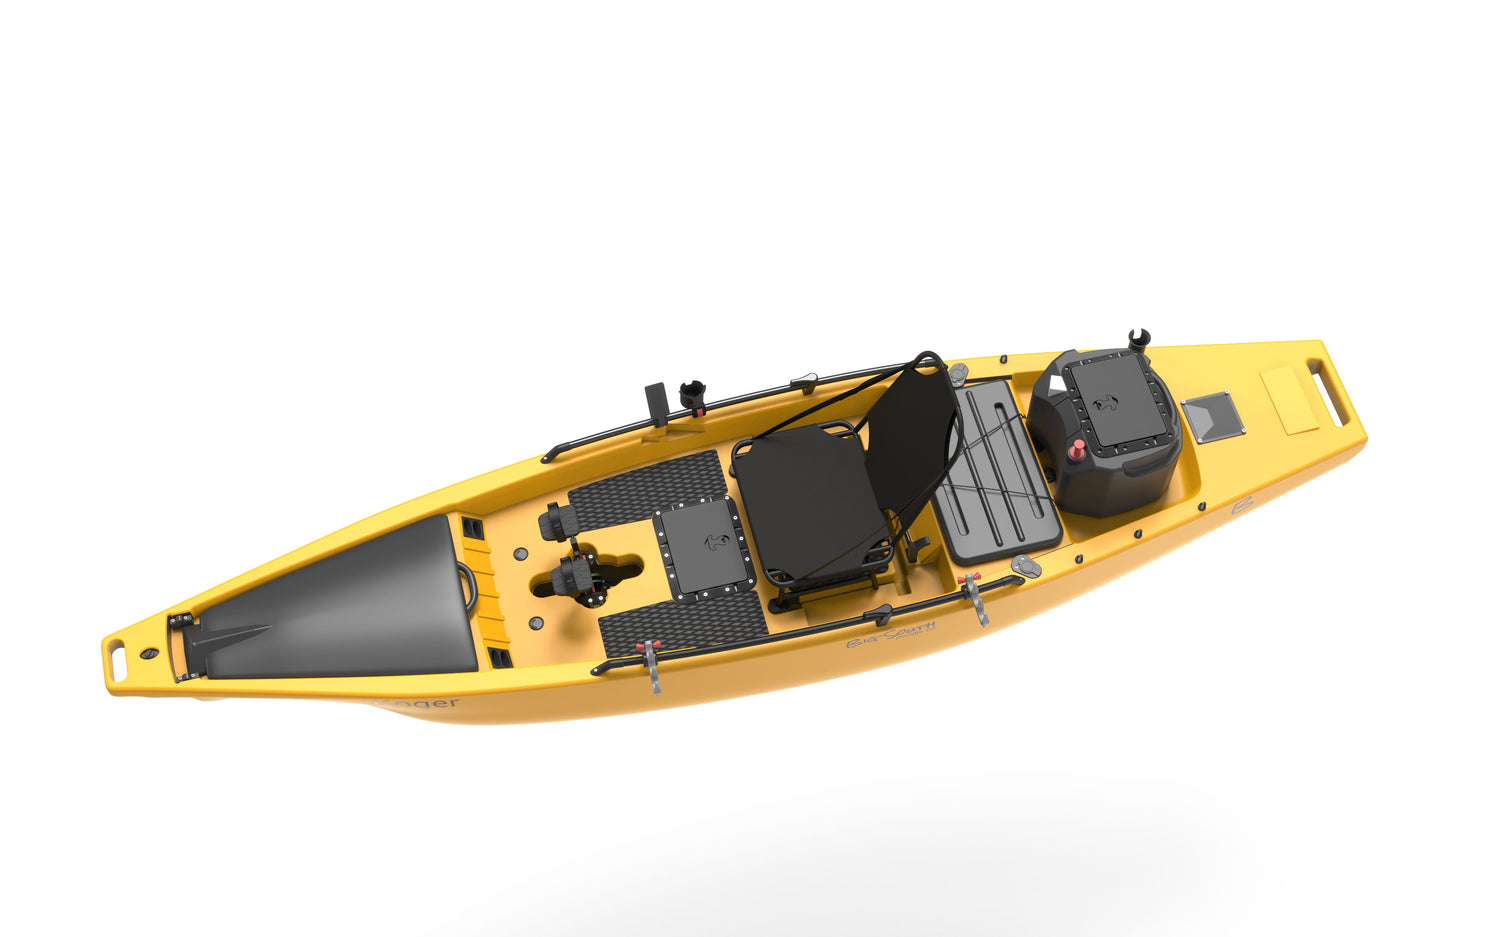 Koger 14 Foot Peddle Fishing Kayak with Live Well, 360 Degree Seat, and Accessories. Overhead Angle